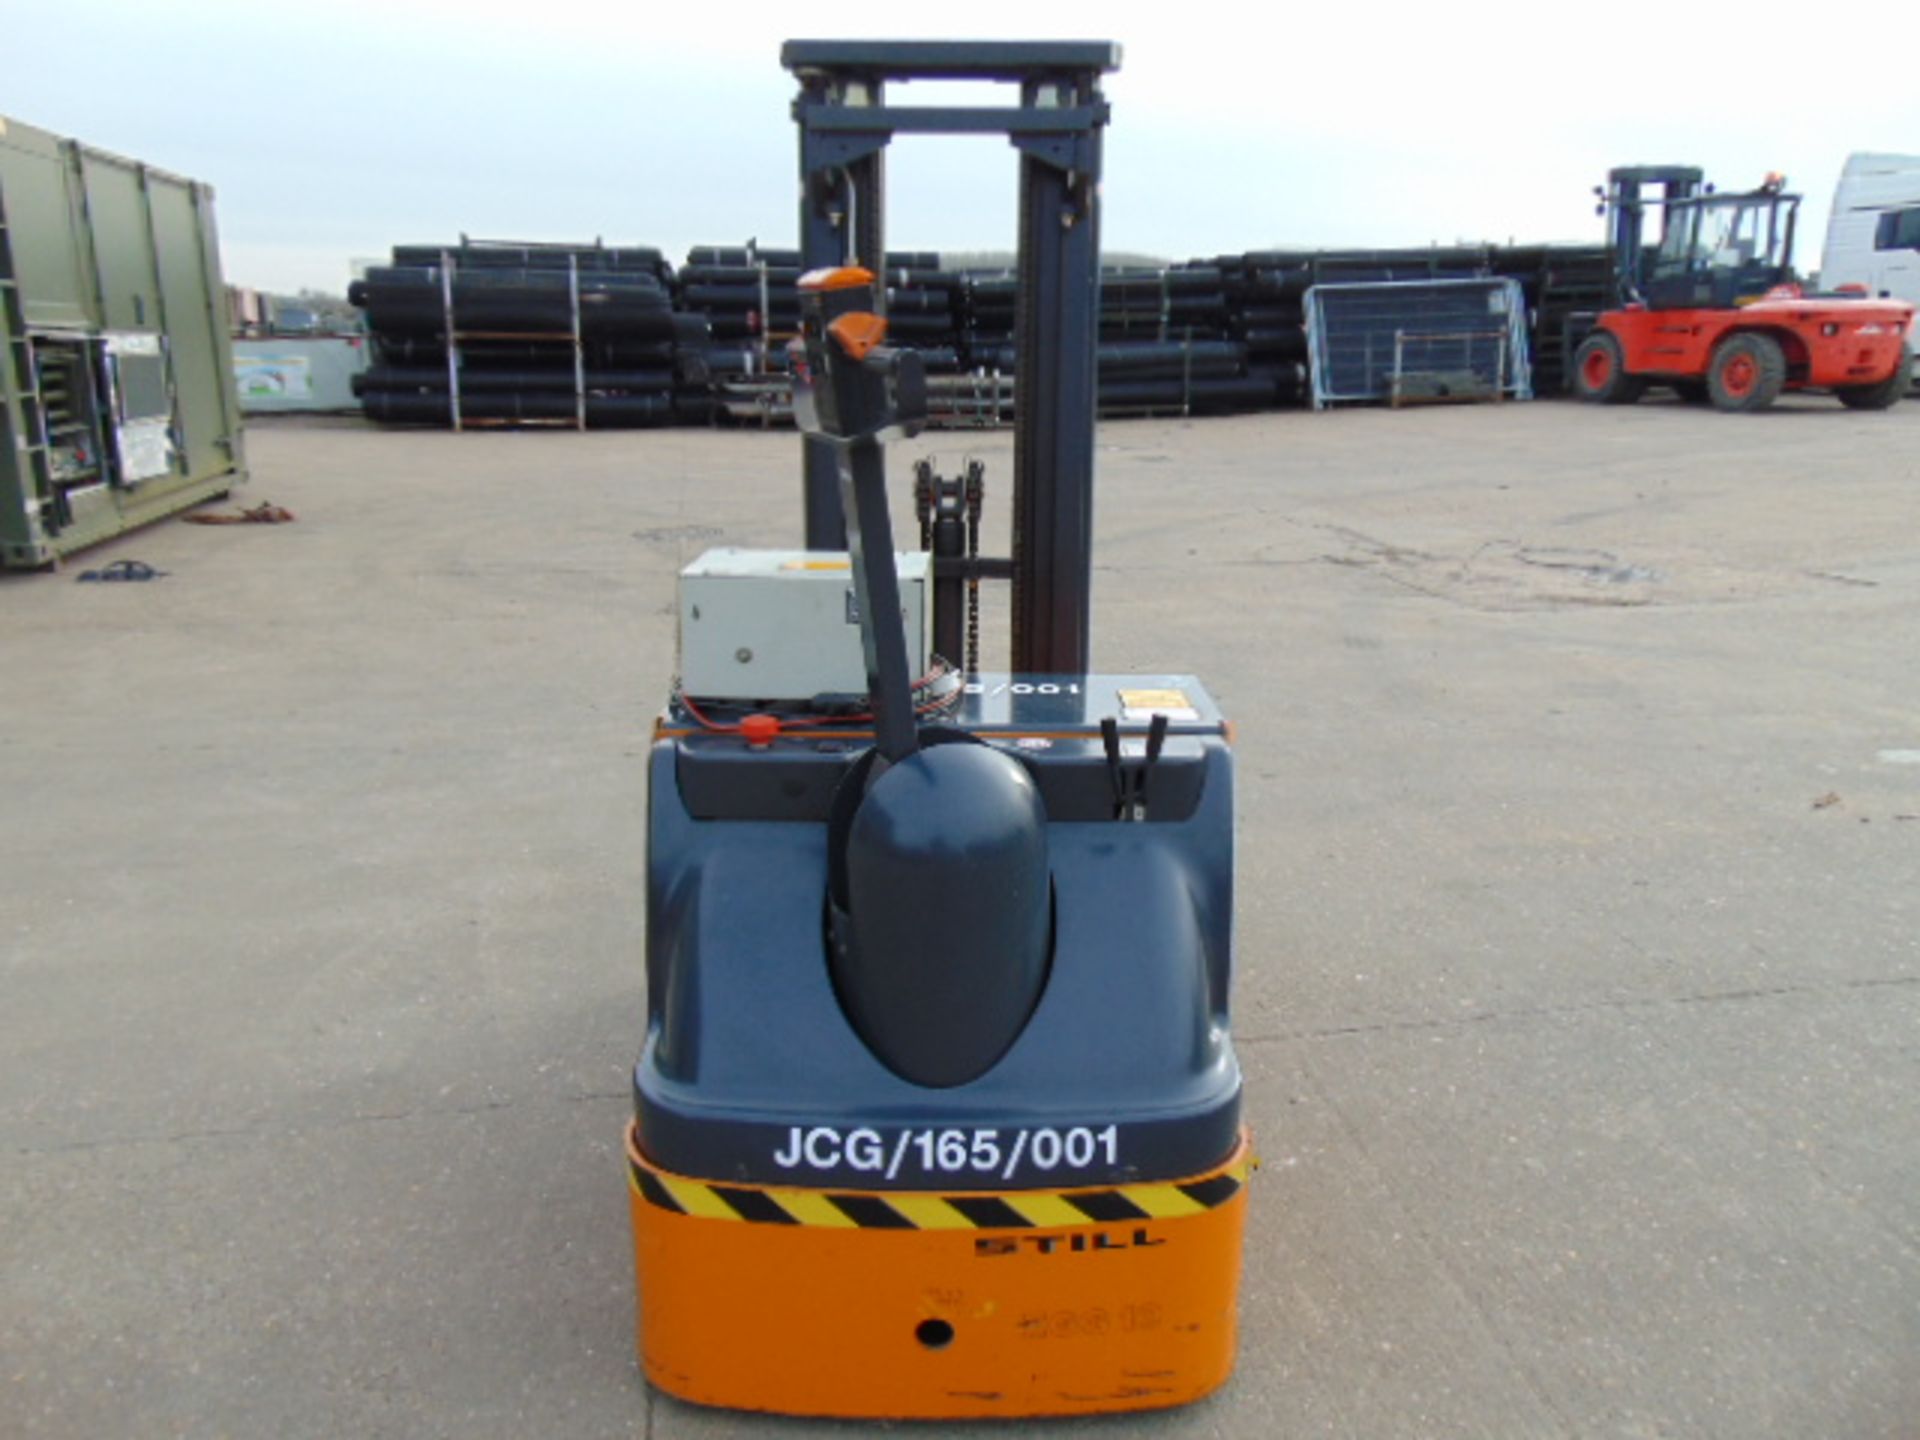 Still EGG10 Electric Pedestrian Pallet Stacker c/w Charger - Image 7 of 18